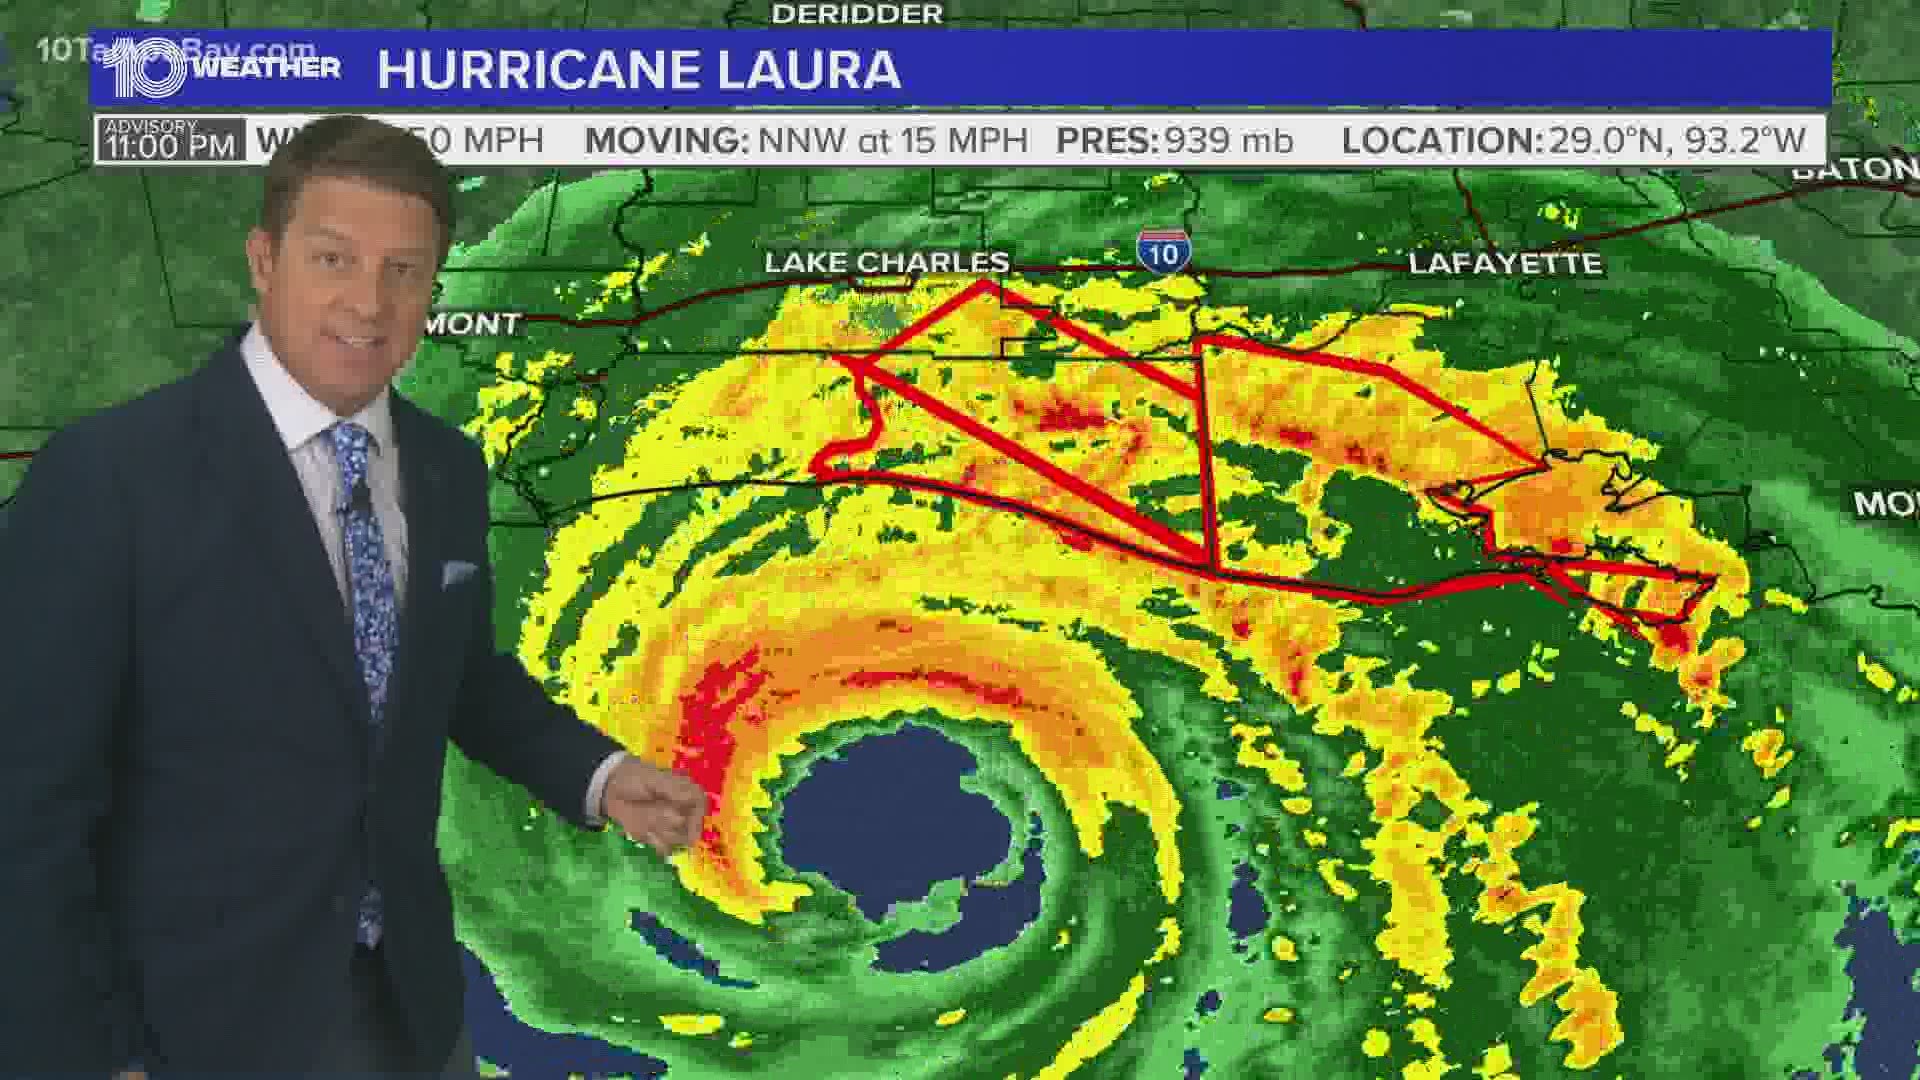 Laura strengthened into a major, Category 4 storm Wednesday evening with 150-mph winds.